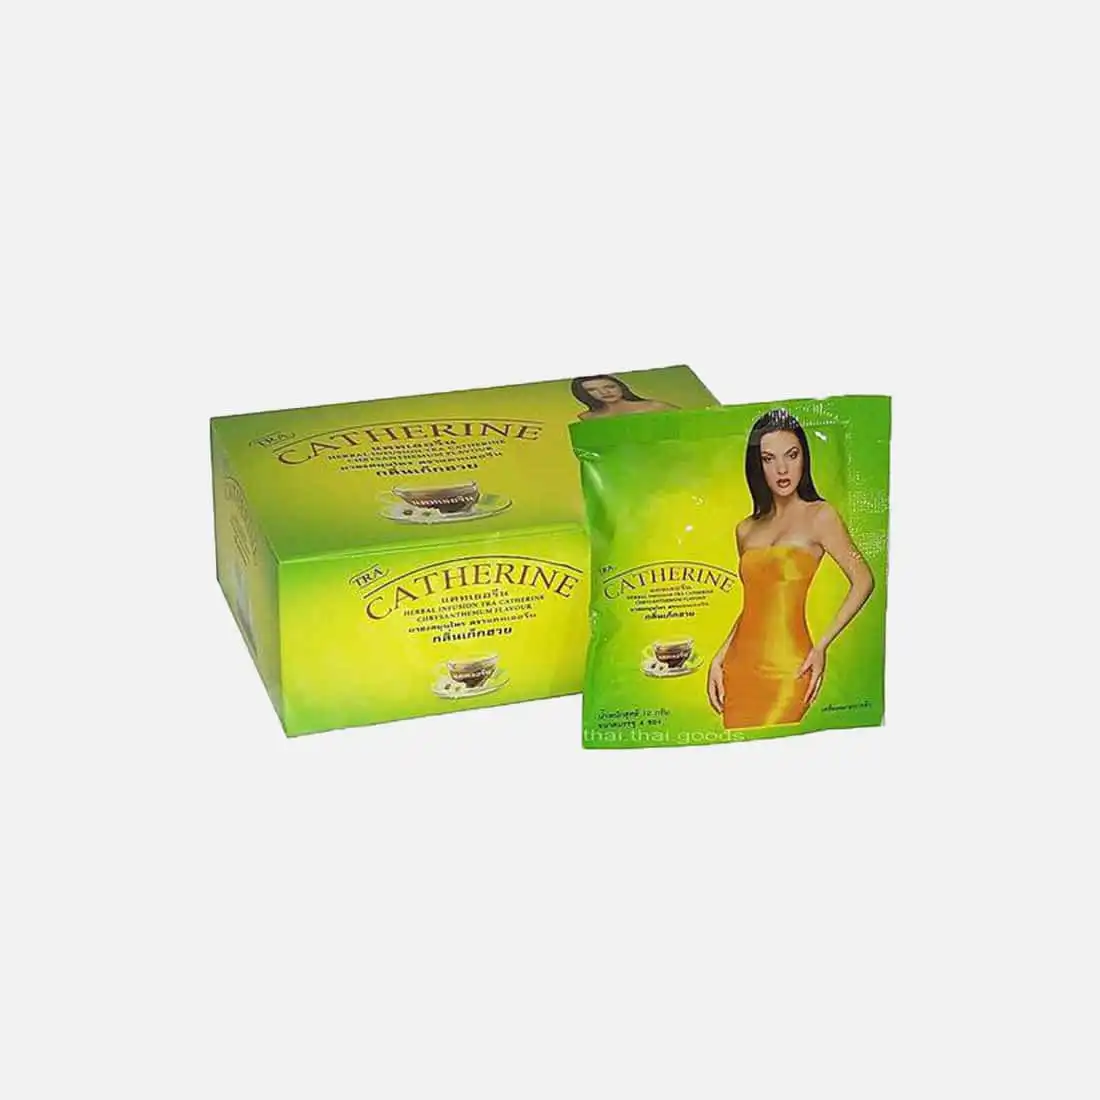 Catherine Herbal Slimming Tea for Weight Loss - Garcinia, an...